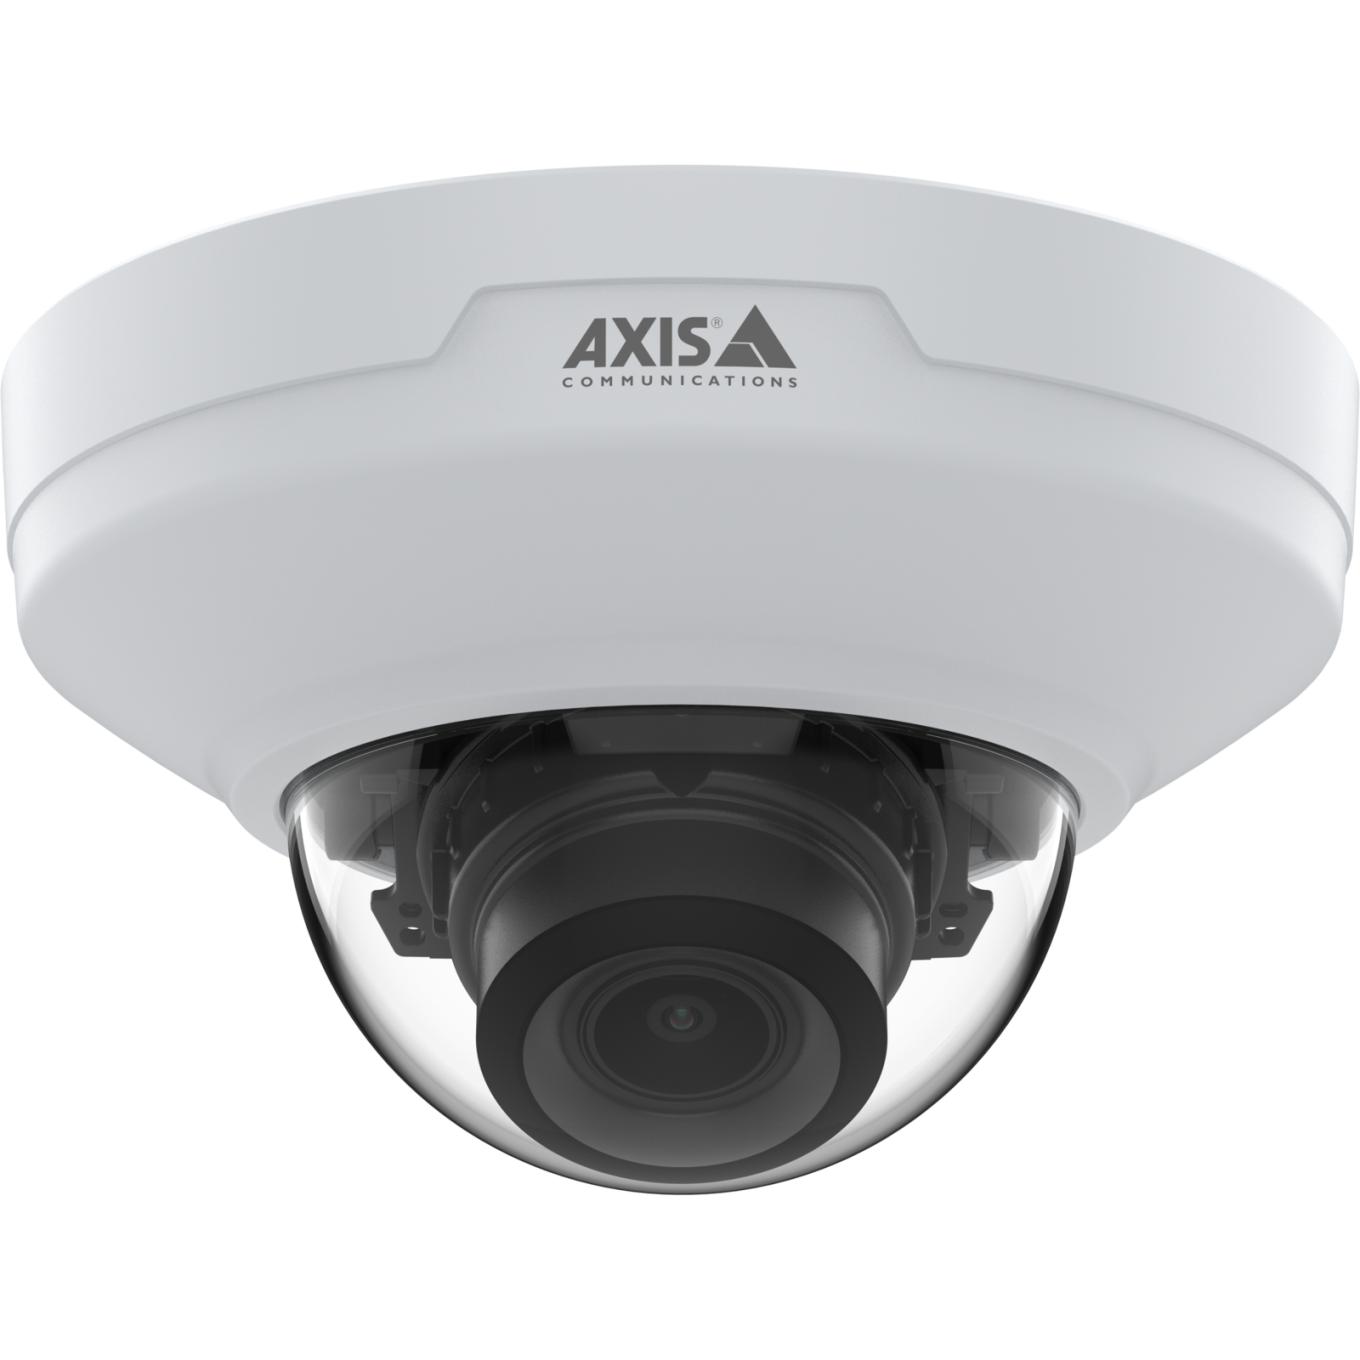 AXIS M4216-V Dome Camera、天井設置、正面から見た図